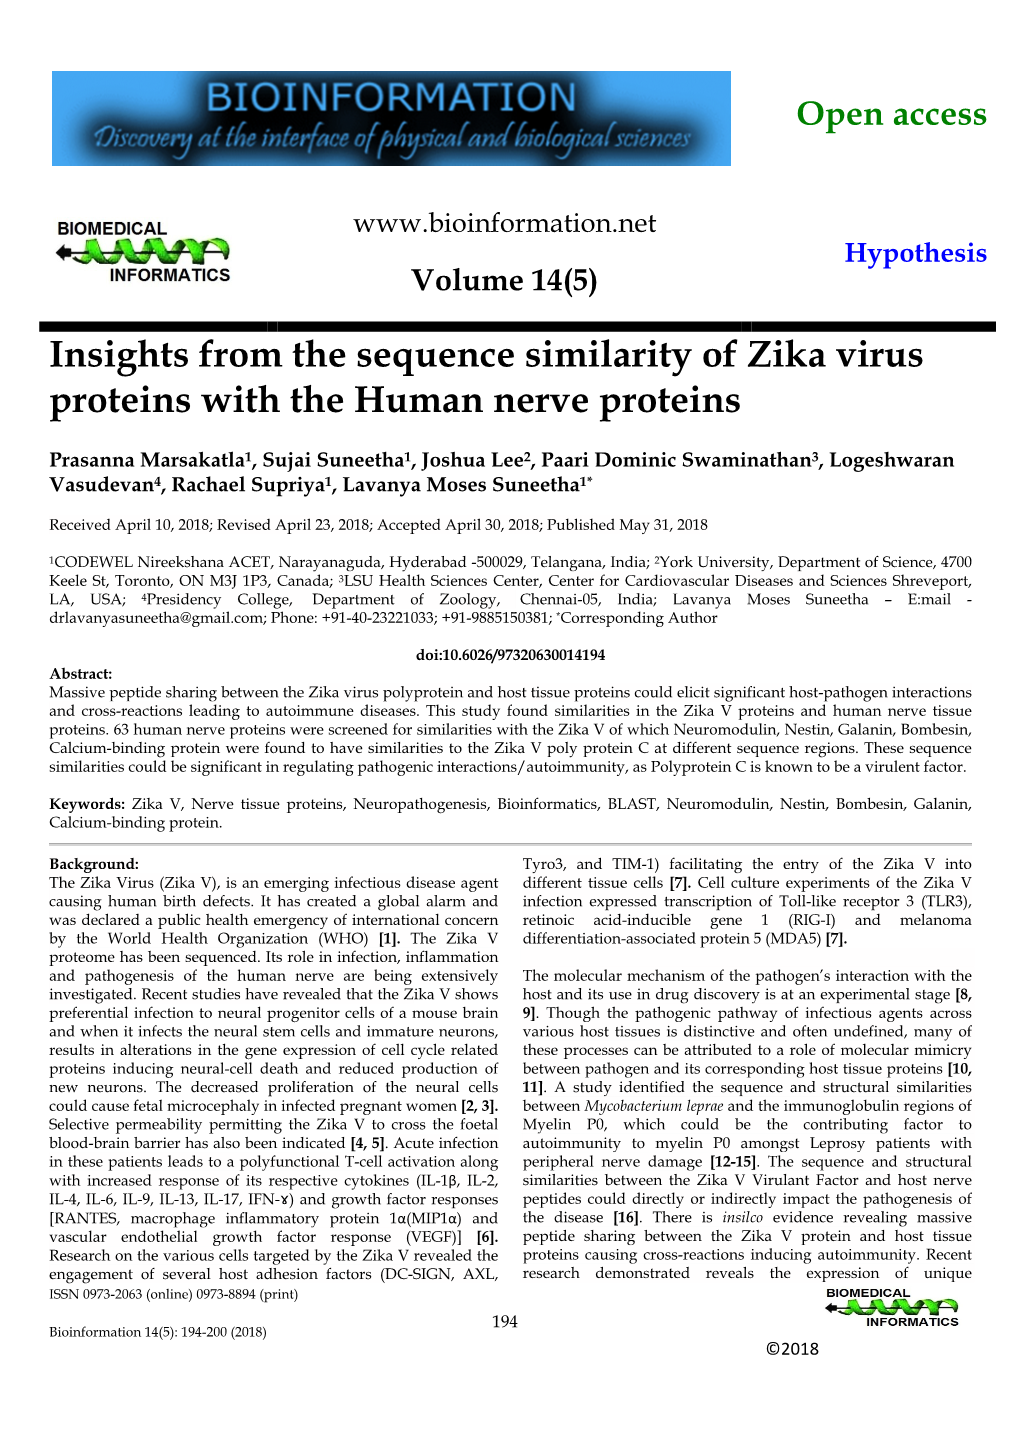 Insights from the Sequence Similarity of Zika Virus Proteins with the Human Nerve Proteins